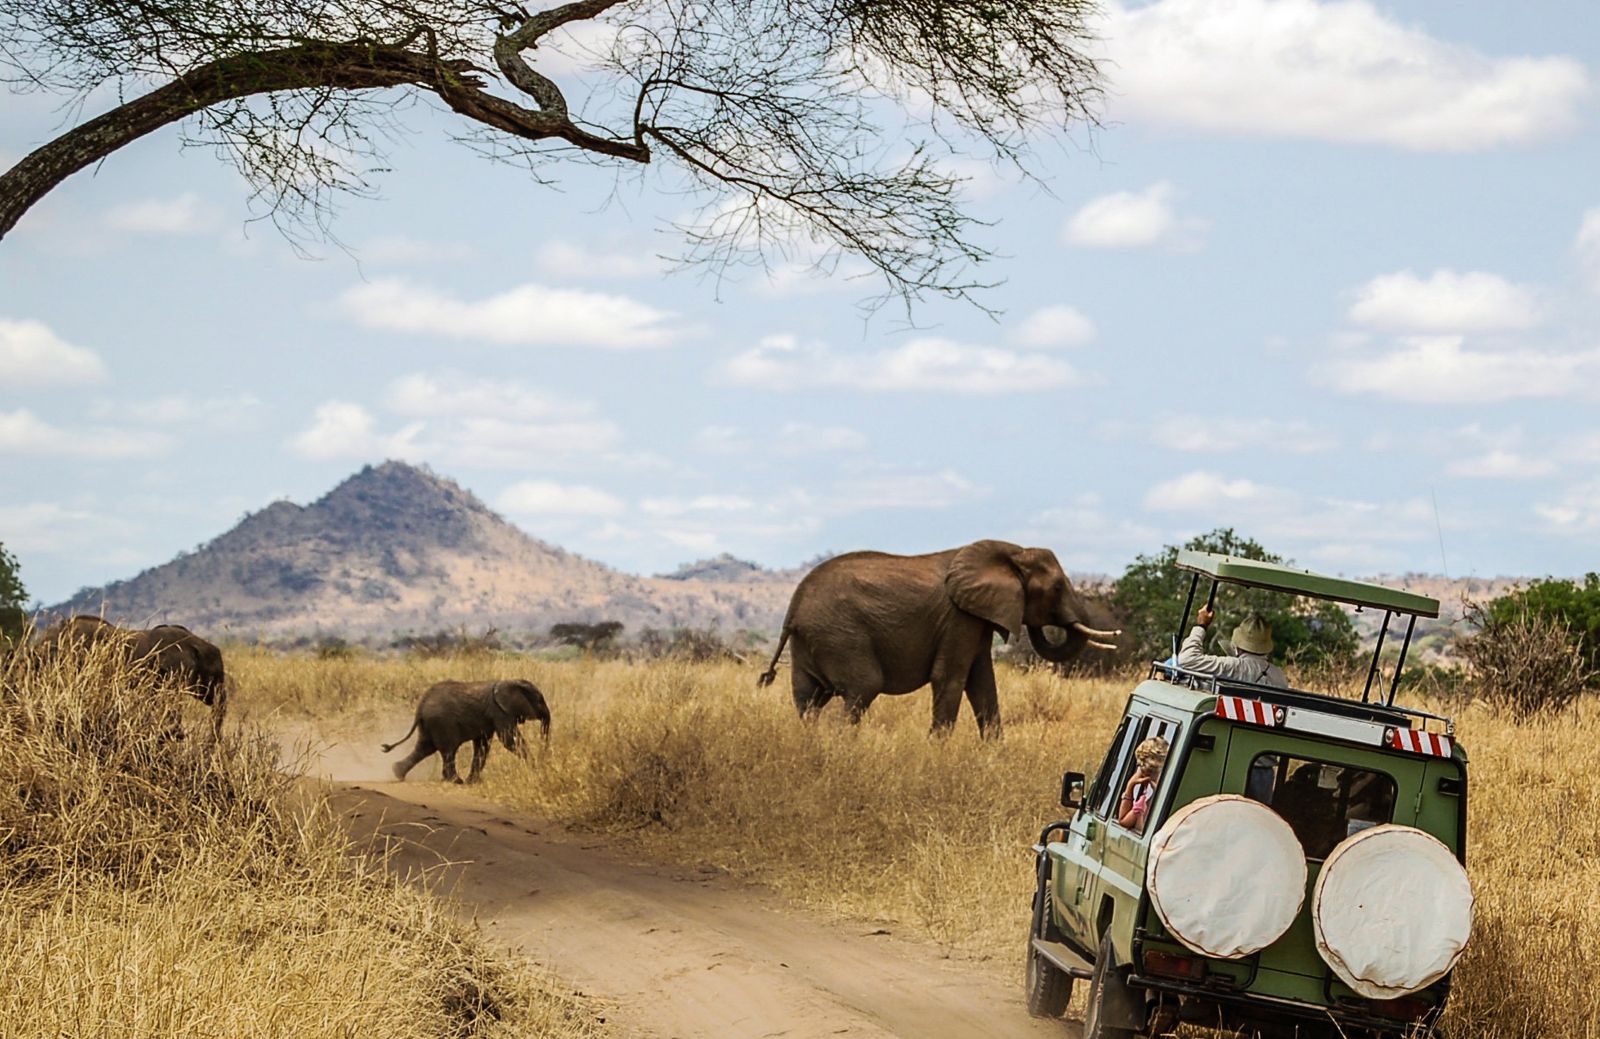 A game drive vehicle on safari in Tanzania encountering a family of elephants 